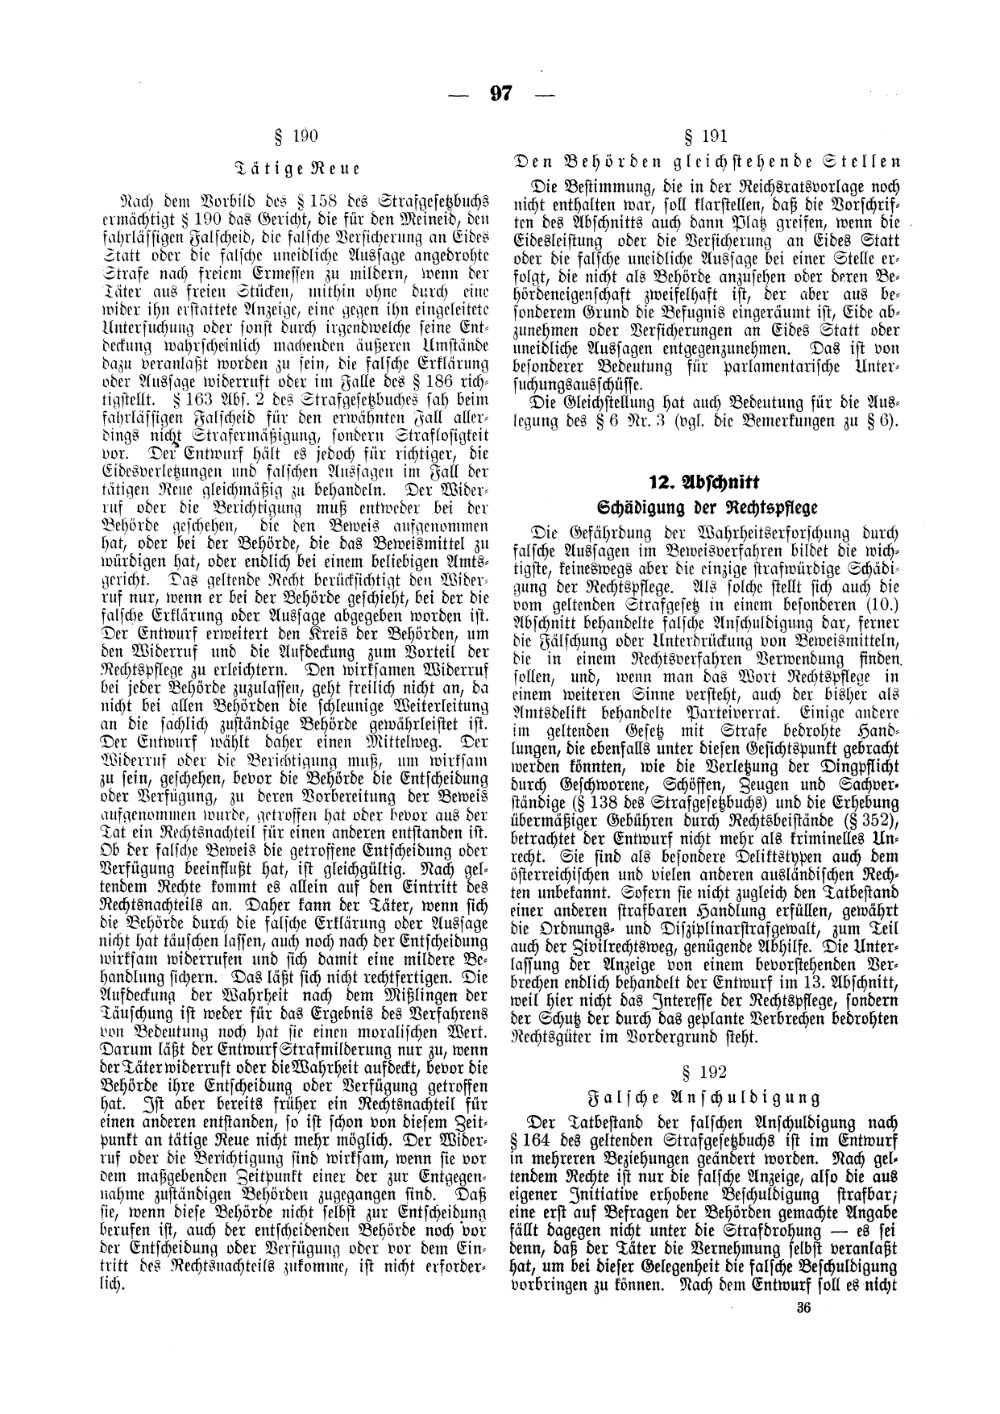 Scan of page 97